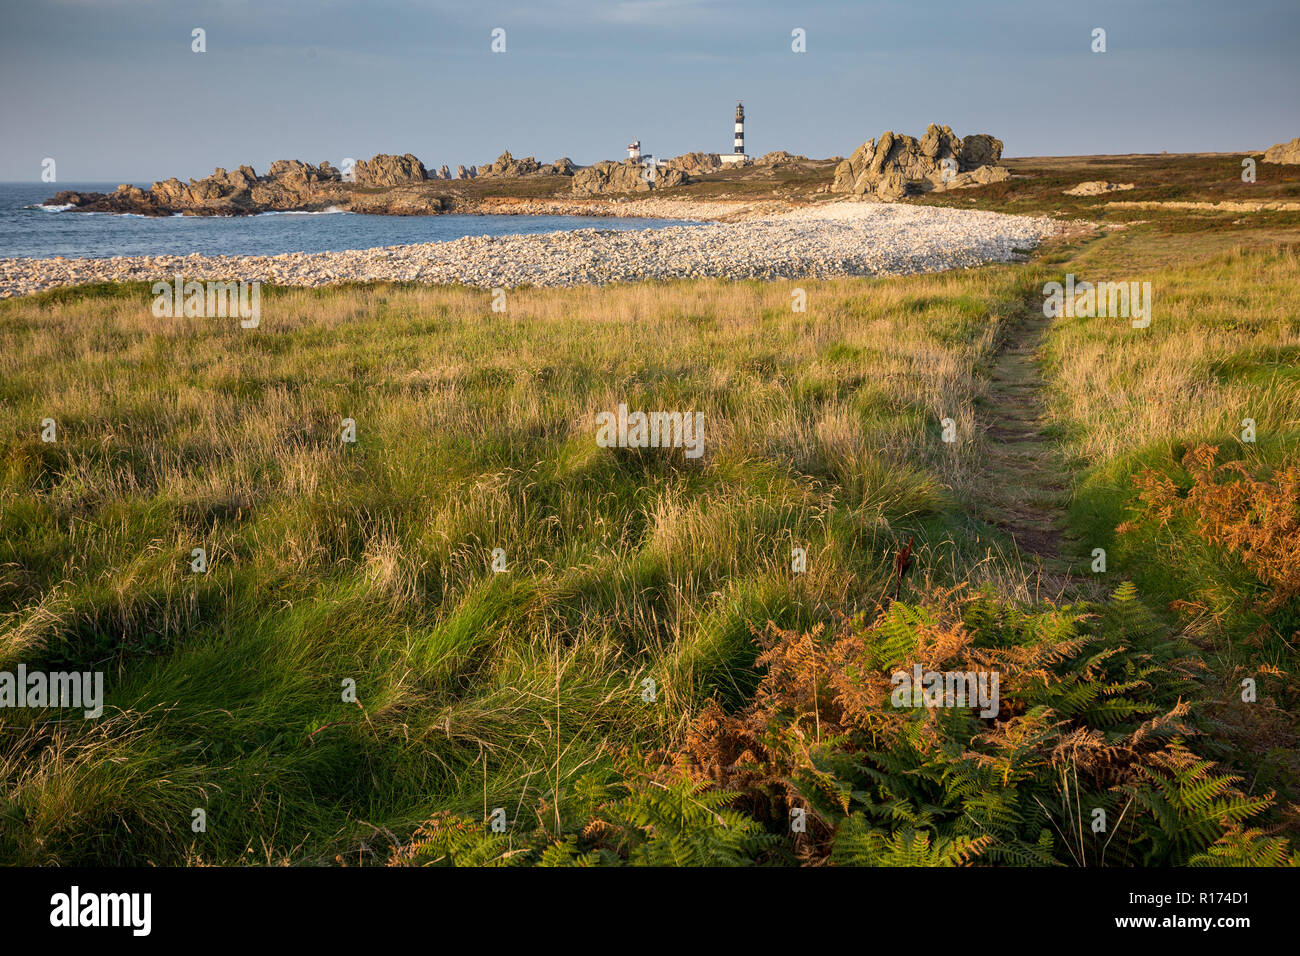 ushant island coastline landscape at the Pern point with the Creach lighthouse, Brittany, France Stock Photo